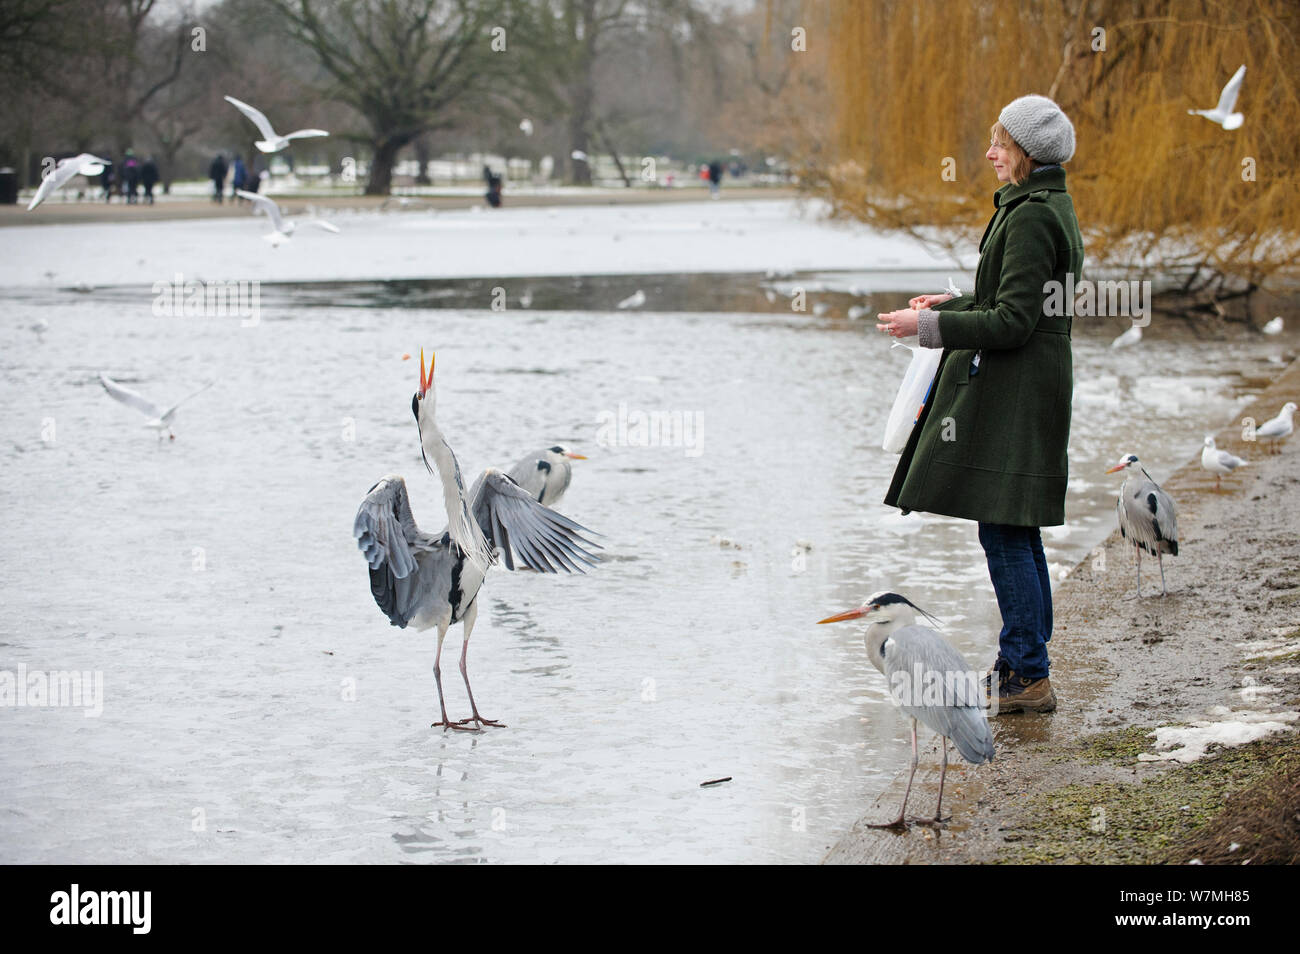 Grey Heron (Ardea cinerea) being fed on frozen lake by a woman standing on the shore, Regents Park, London, England, UK, February. Model released. 2020VISION Book Plate. Stock Photo